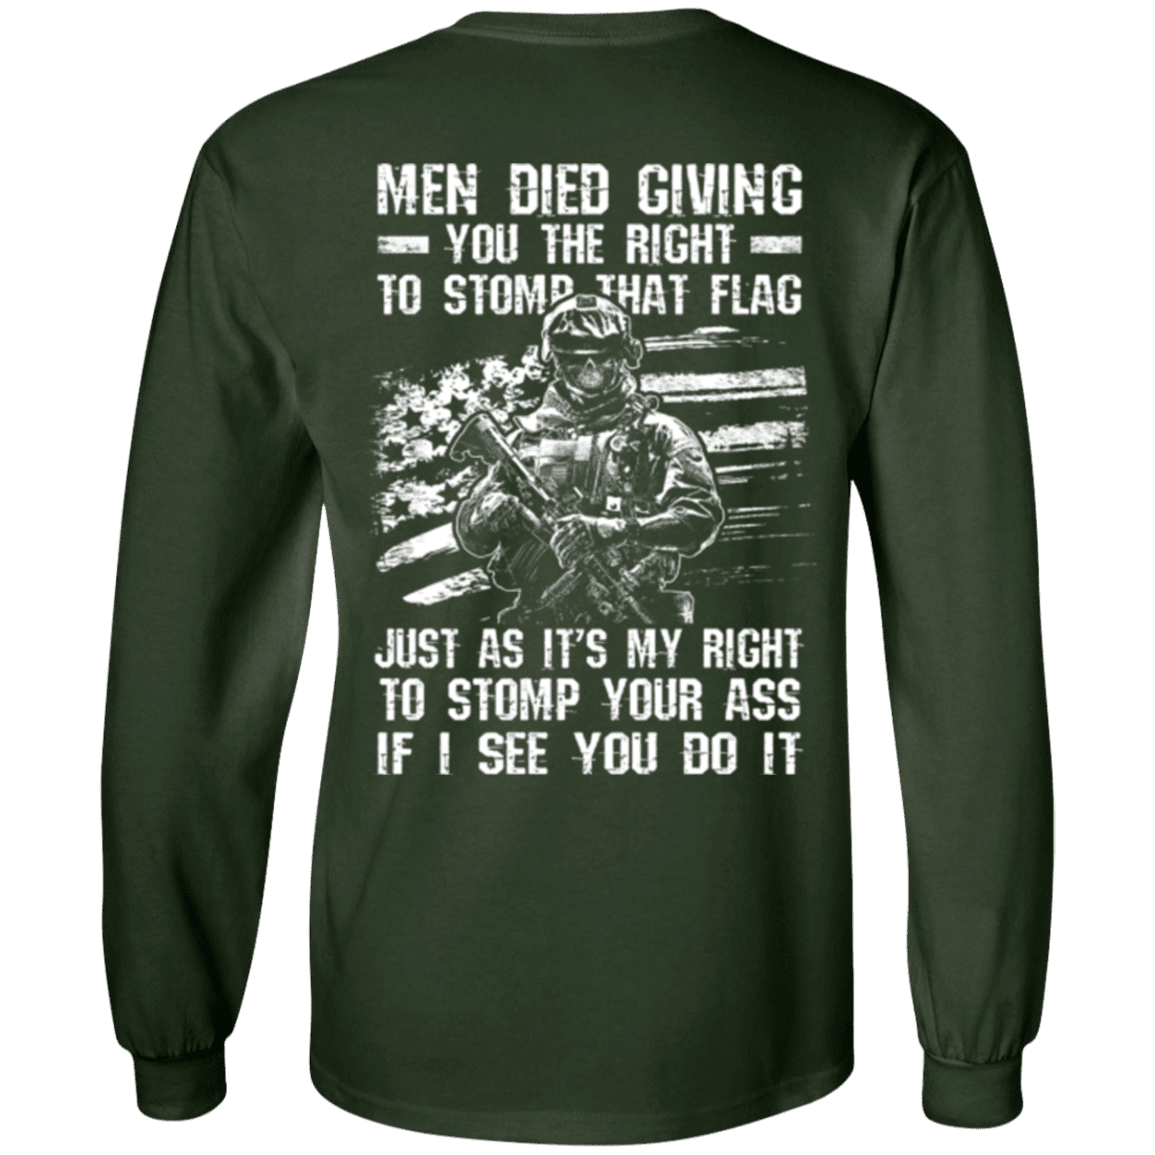 Military T-Shirt "Veteran - Men Died Giving You The Right To Stomp That Flag"-TShirt-General-Veterans Nation